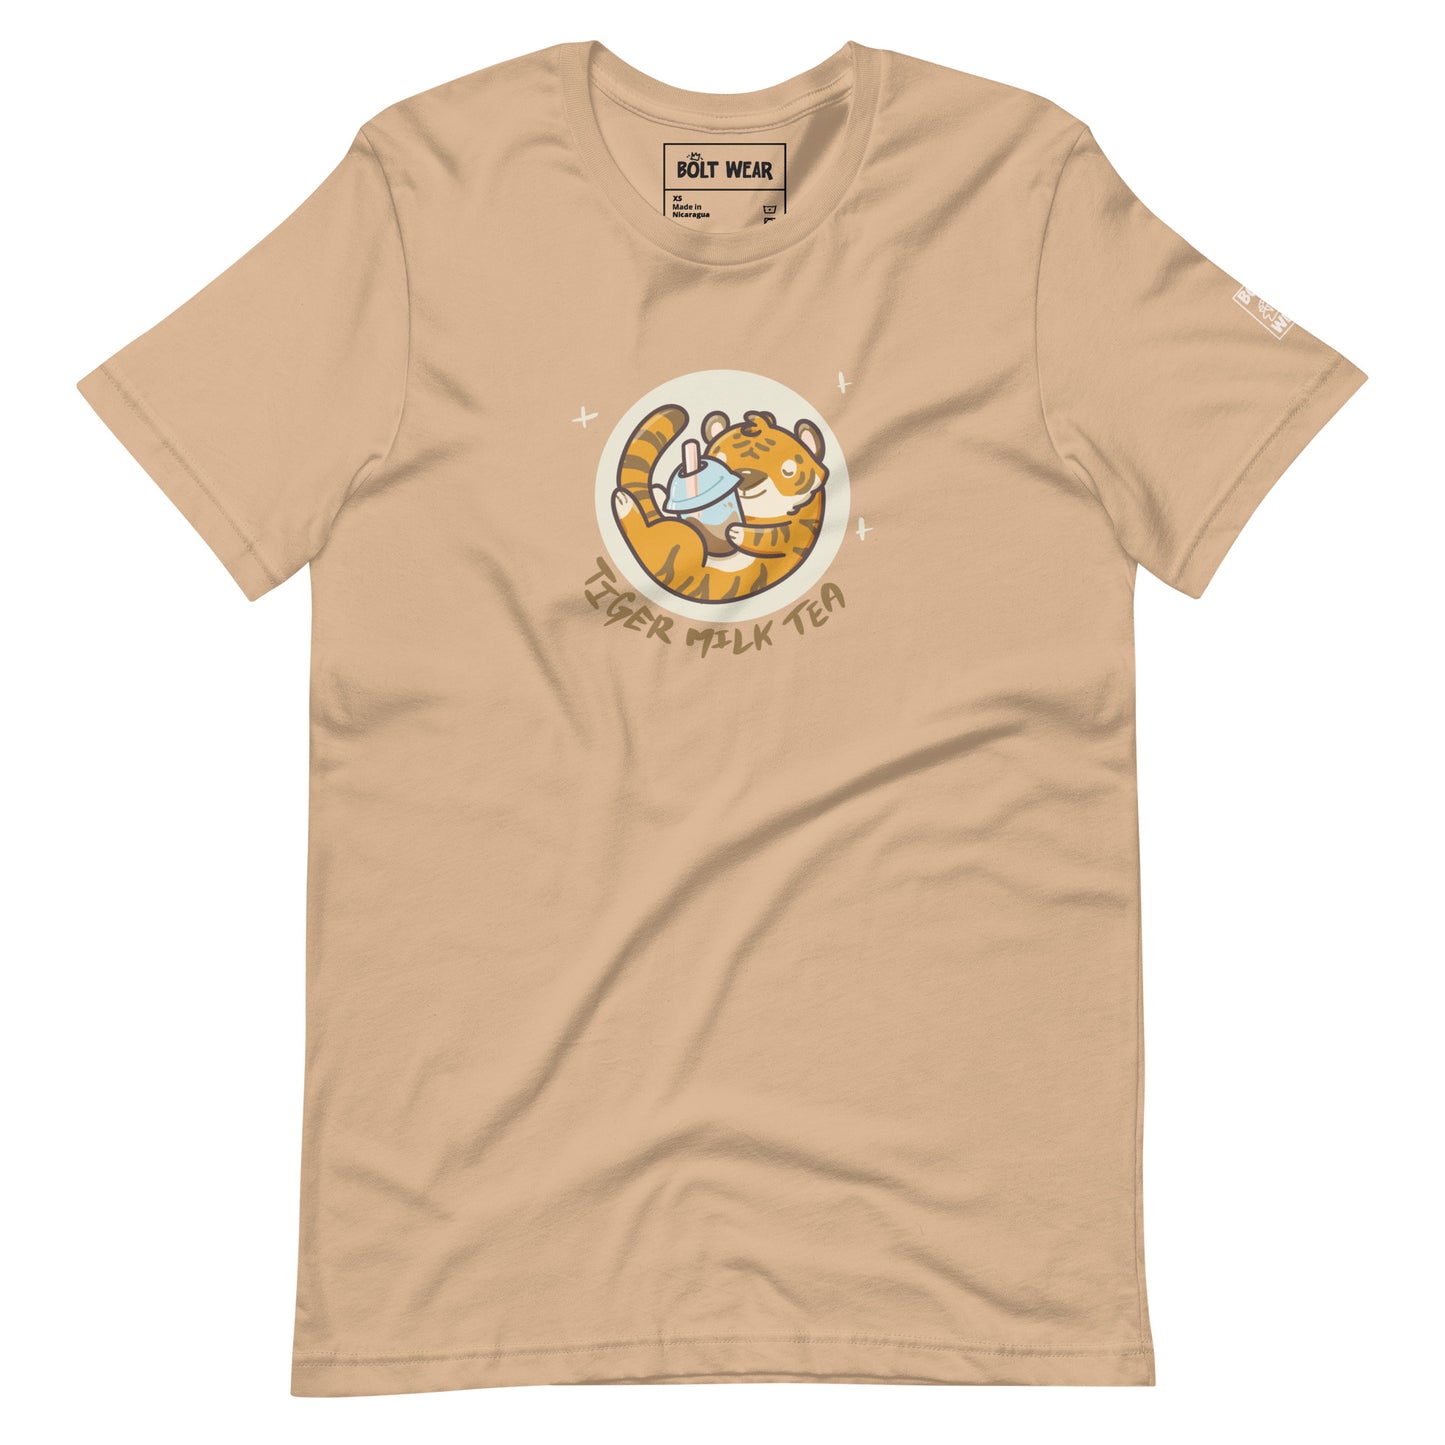 Tan t-shirt featuring  image of tiger holding bubble tea, with the words tiger milk tea underneath.